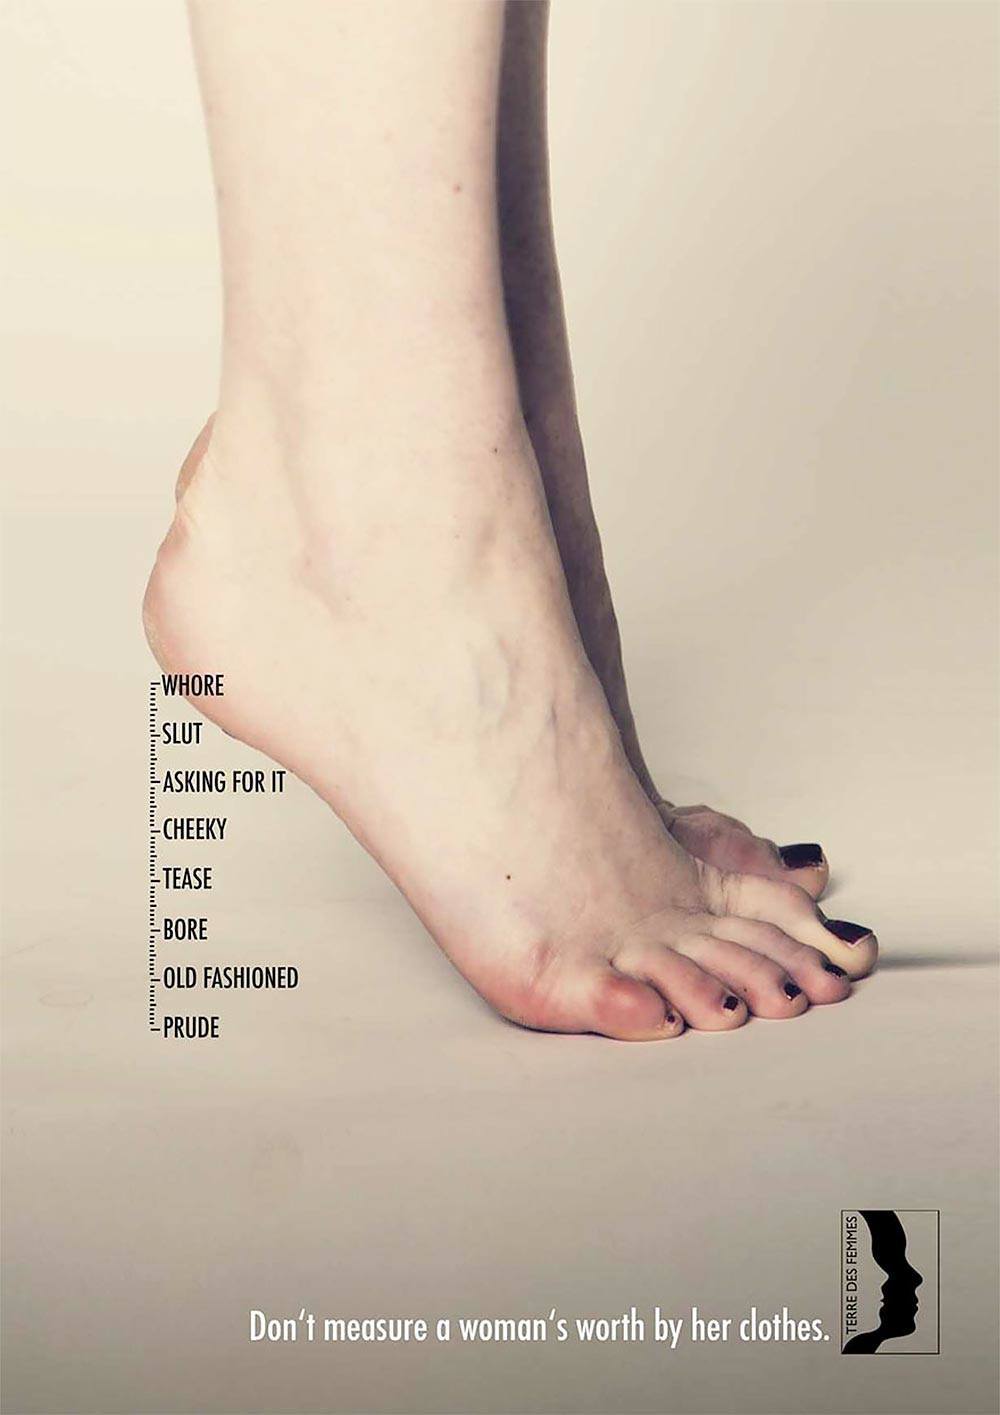 Controversial Ad "Measuring A Woman’s Worth" Takes the Internet by Storm